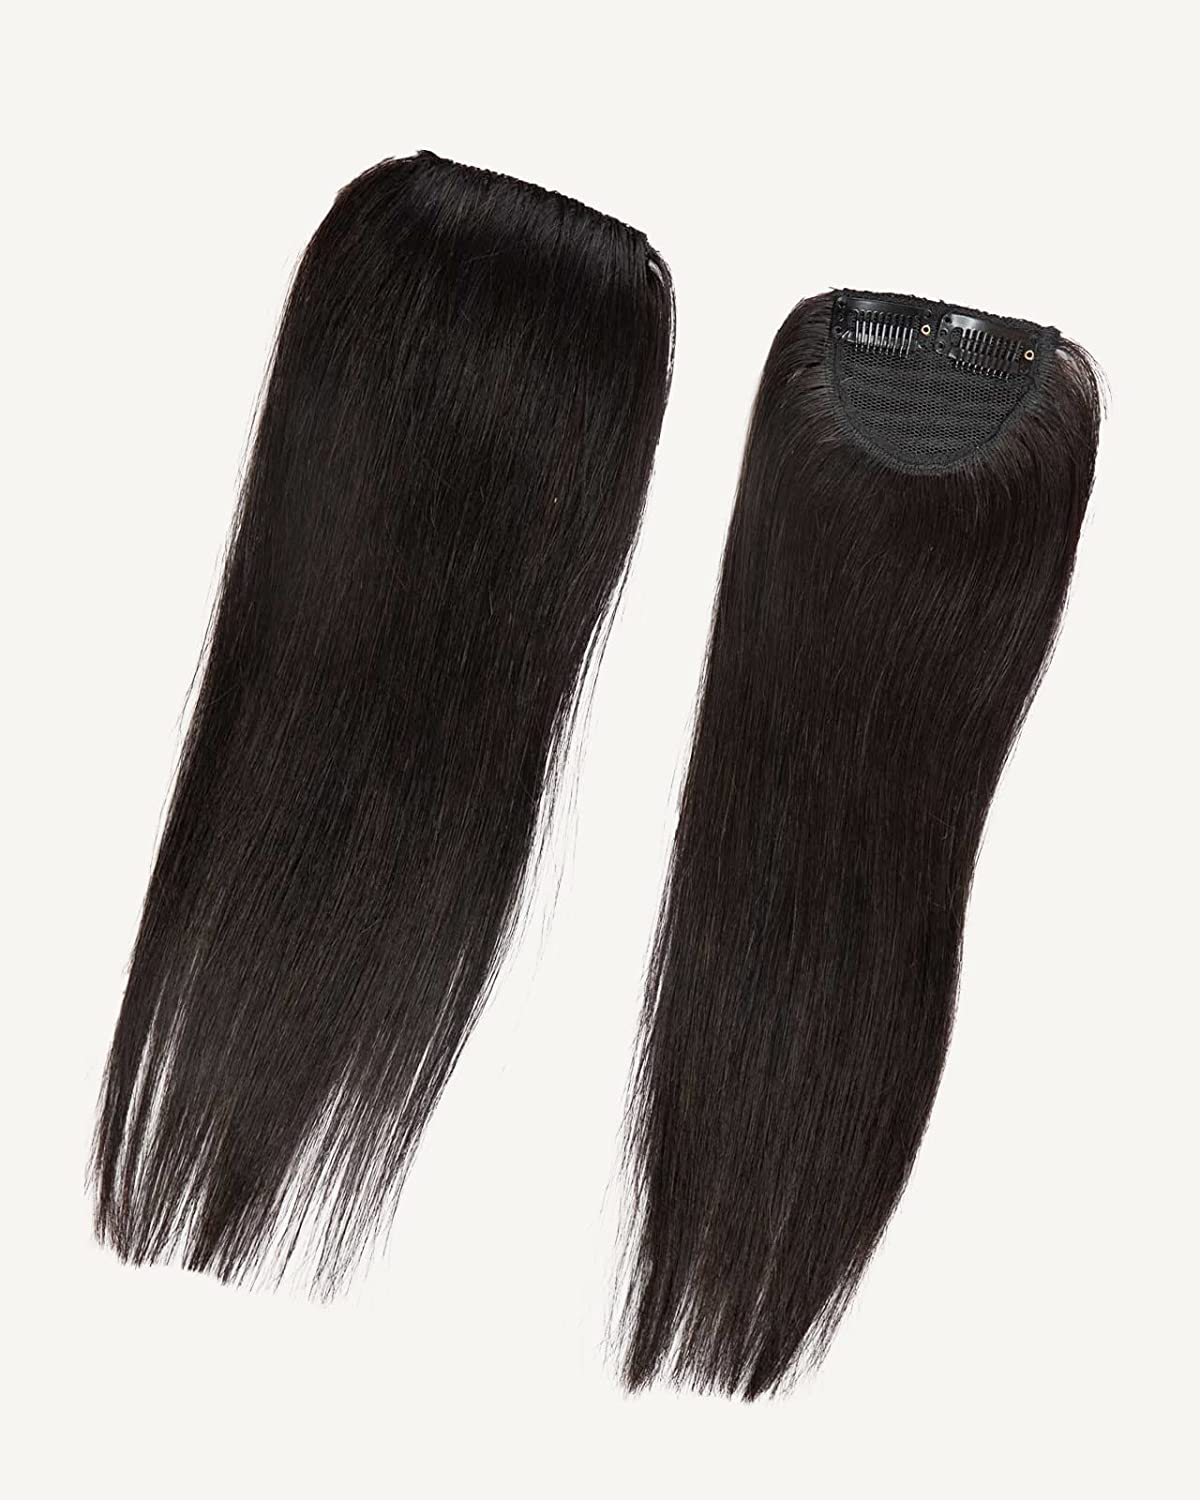 Lush Locks Side patch volumizer hair extensions for Women and Girls